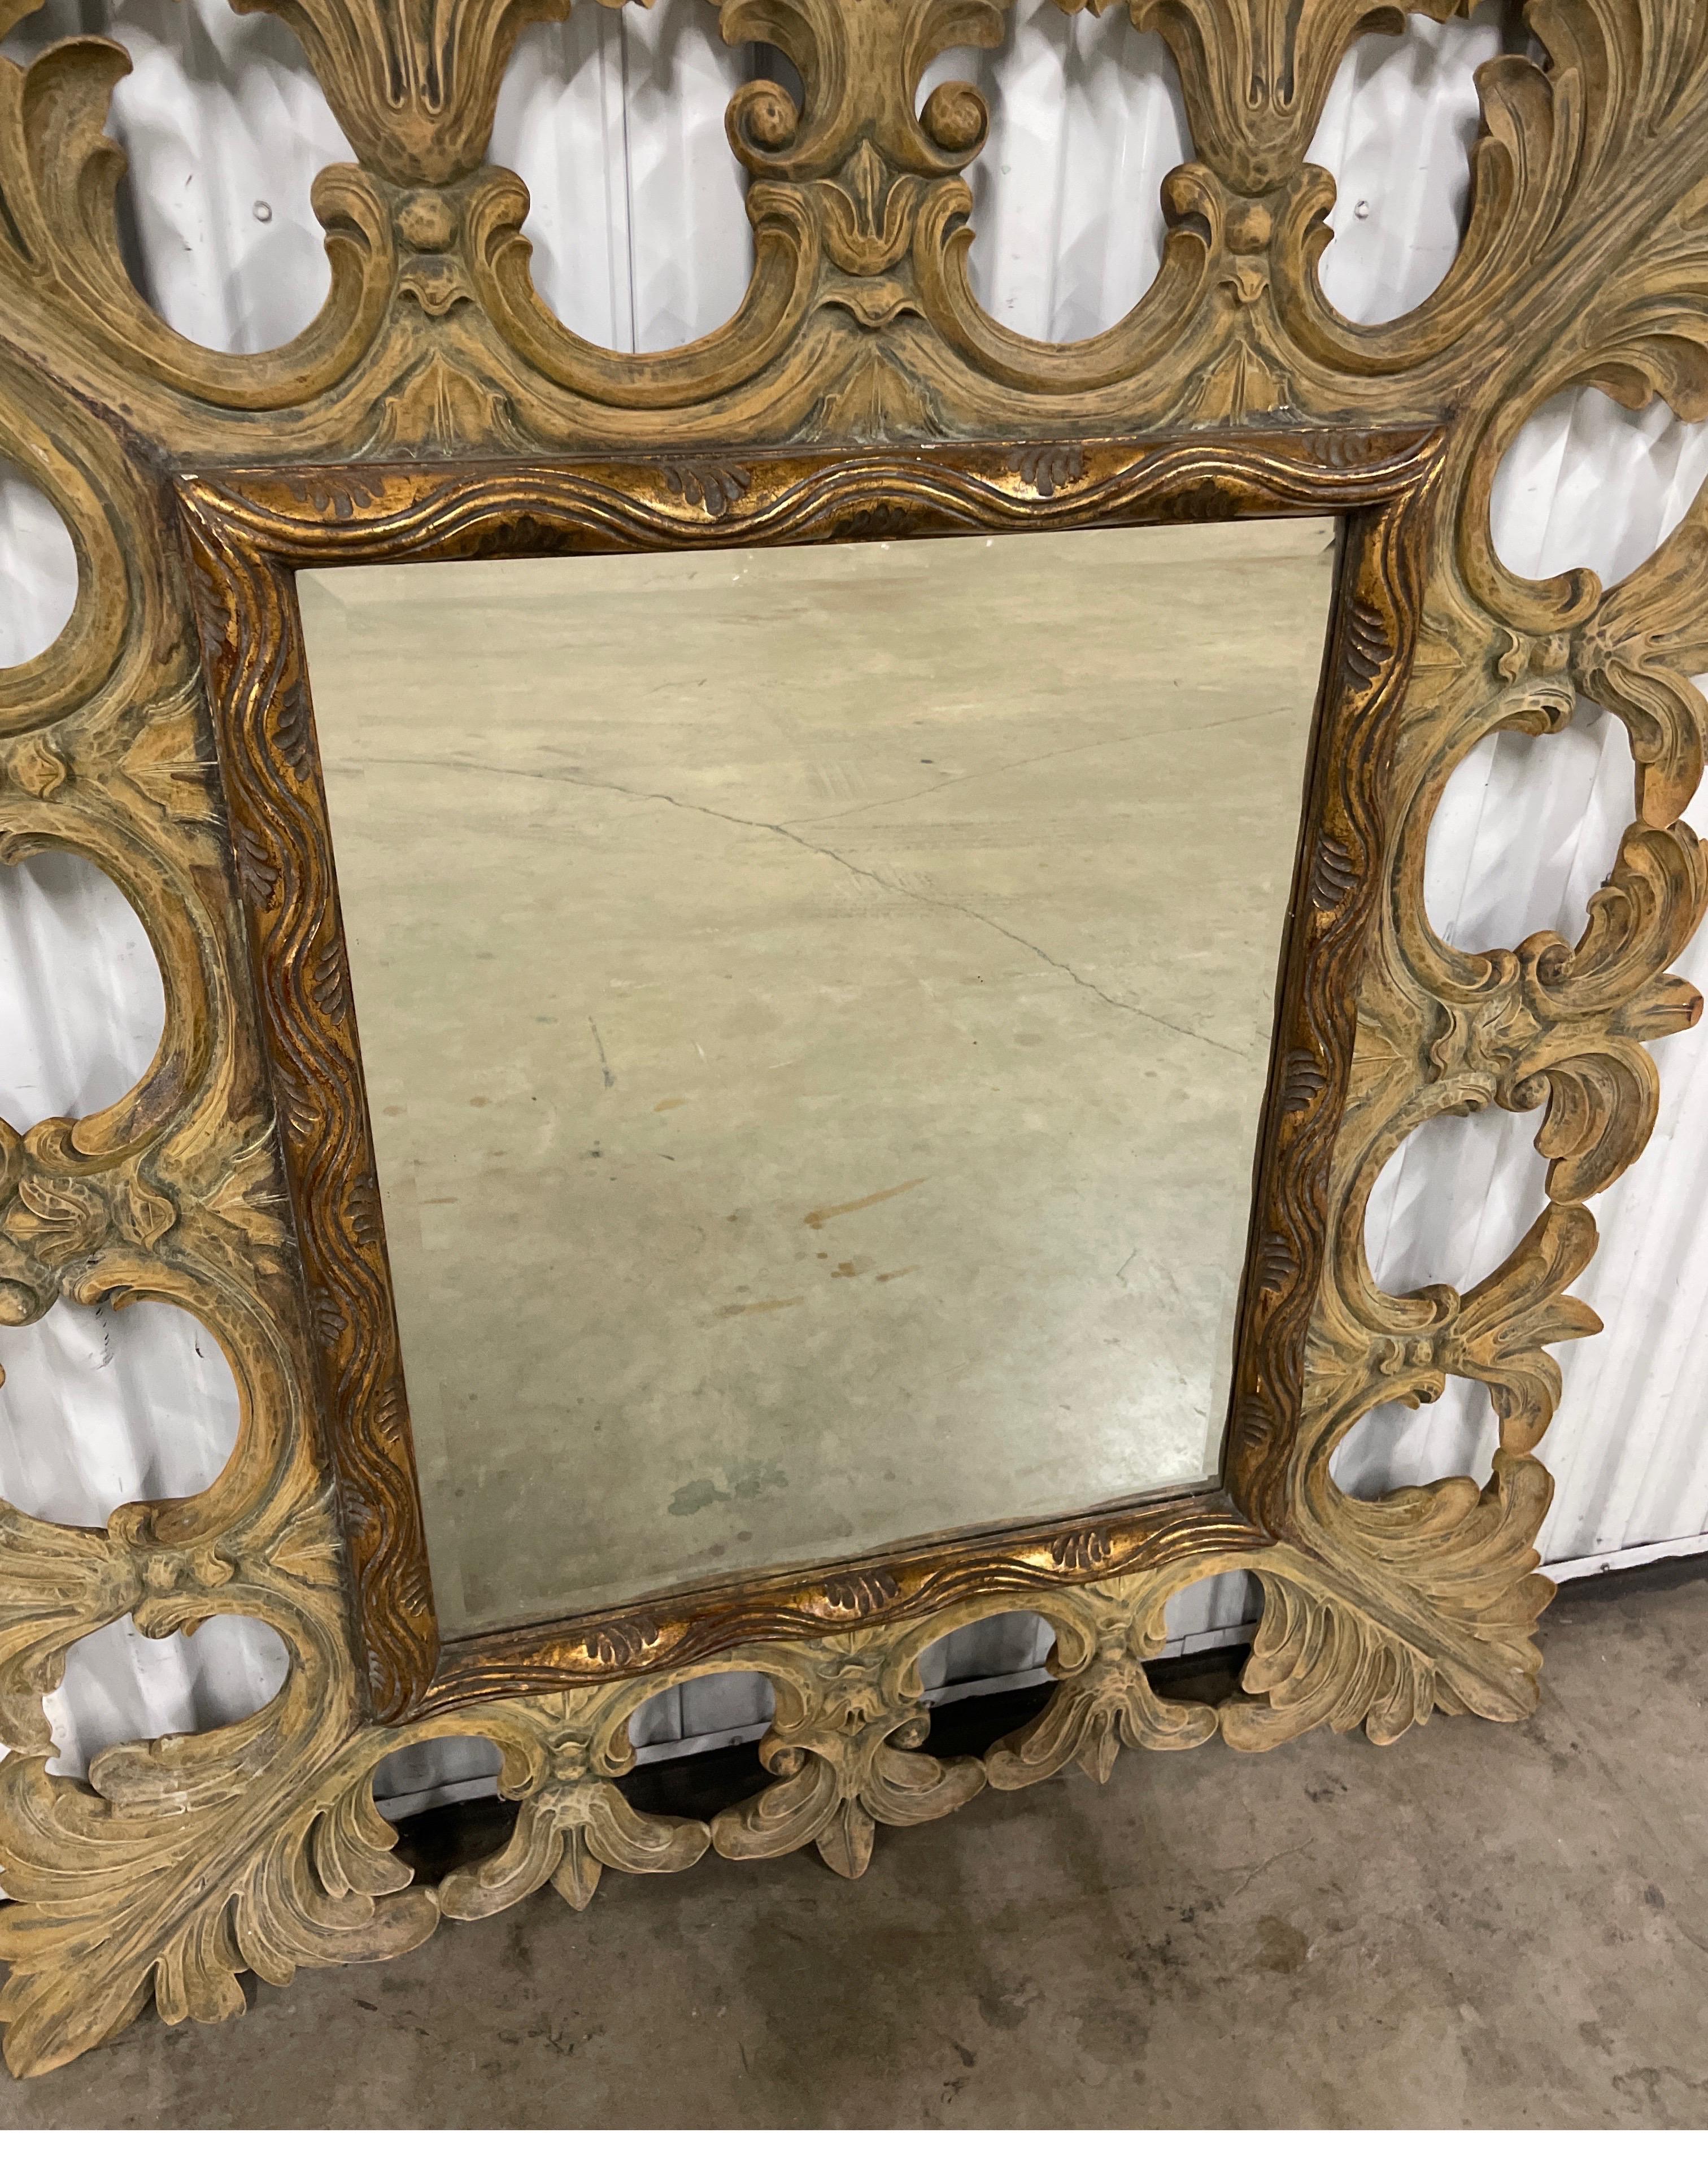 Vintage large scrolled hand carved mirror with leaf motif designs by Harrison & Gil.  This mirror can be hung either vertically or horizontally.